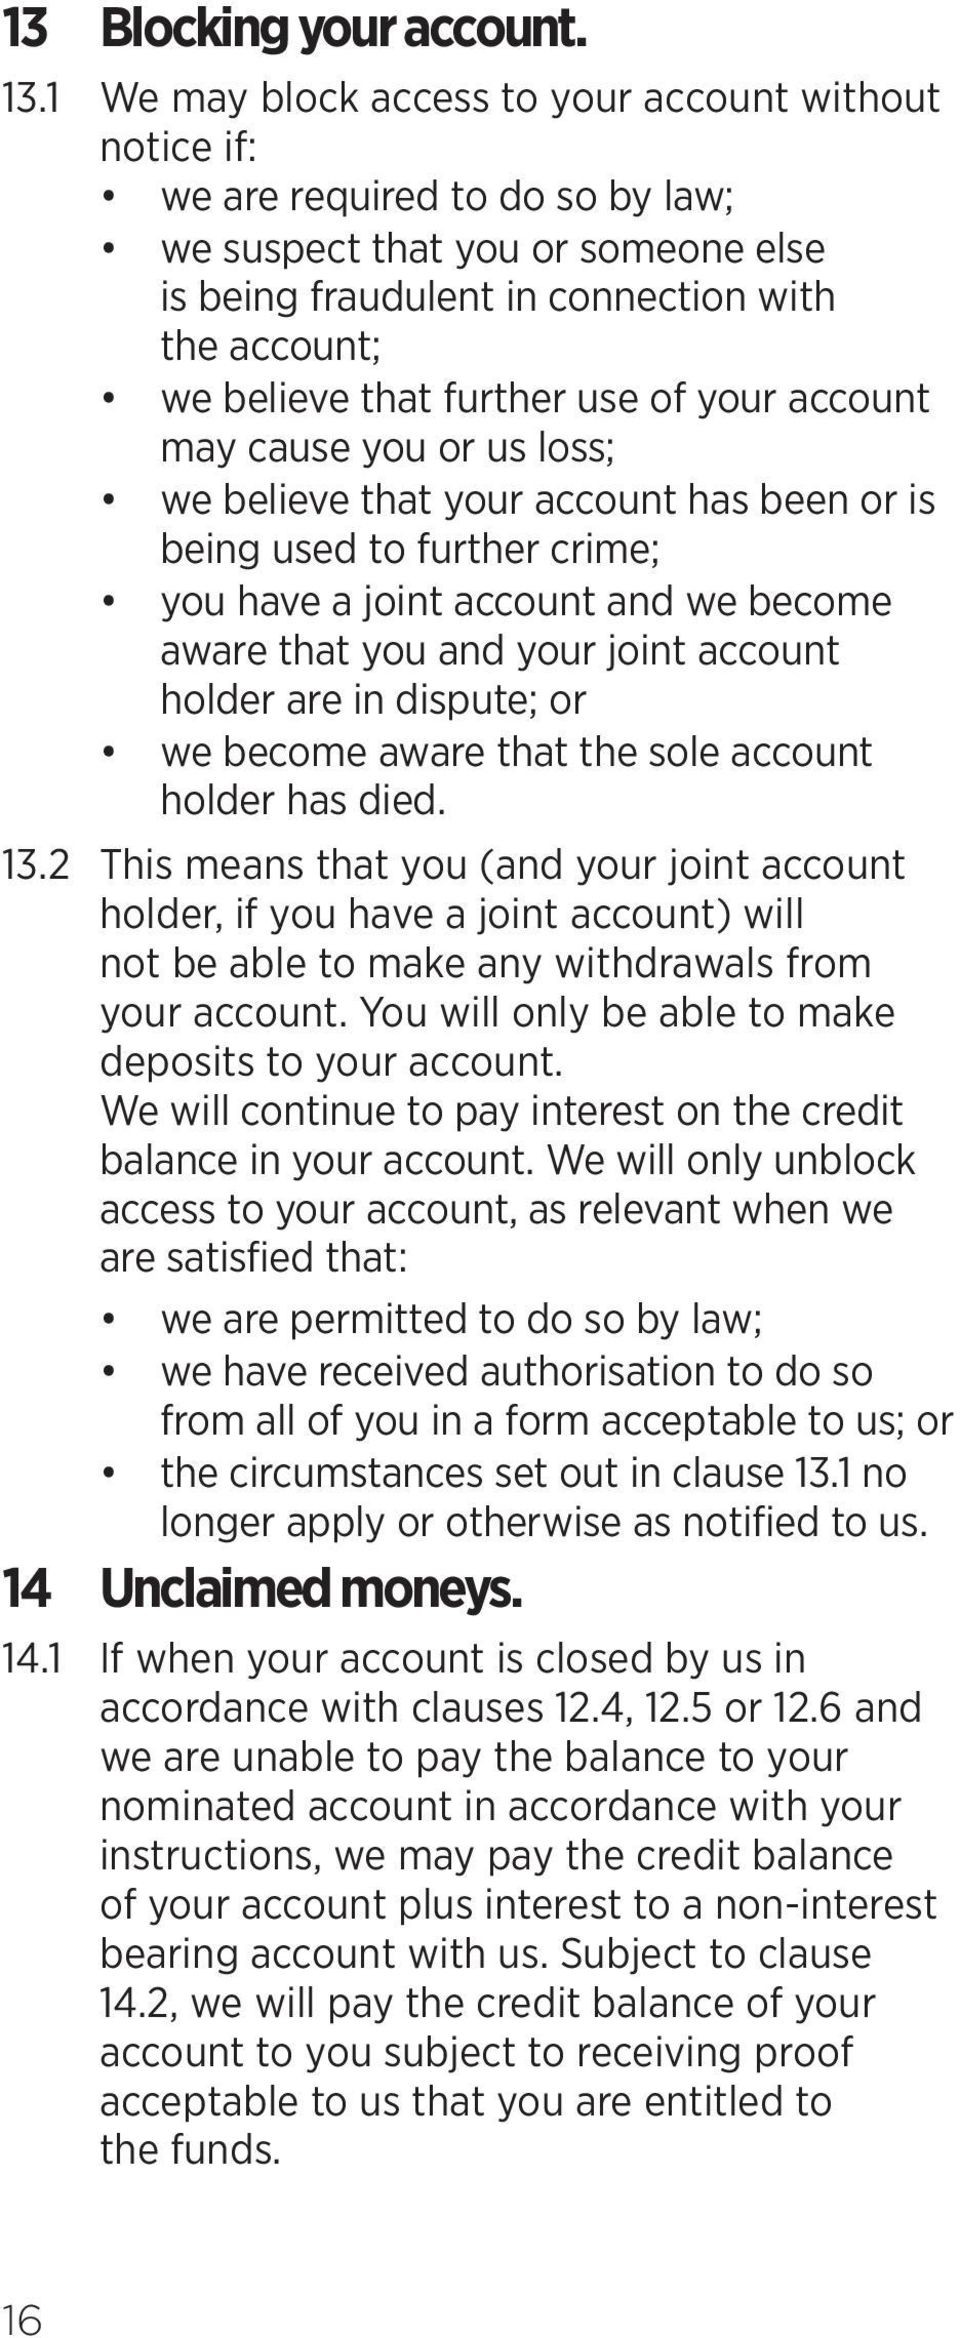 further use of your account may cause you or us loss; we believe that your account has been or is being used to further crime; you have a joint account and we become aware that you and your joint